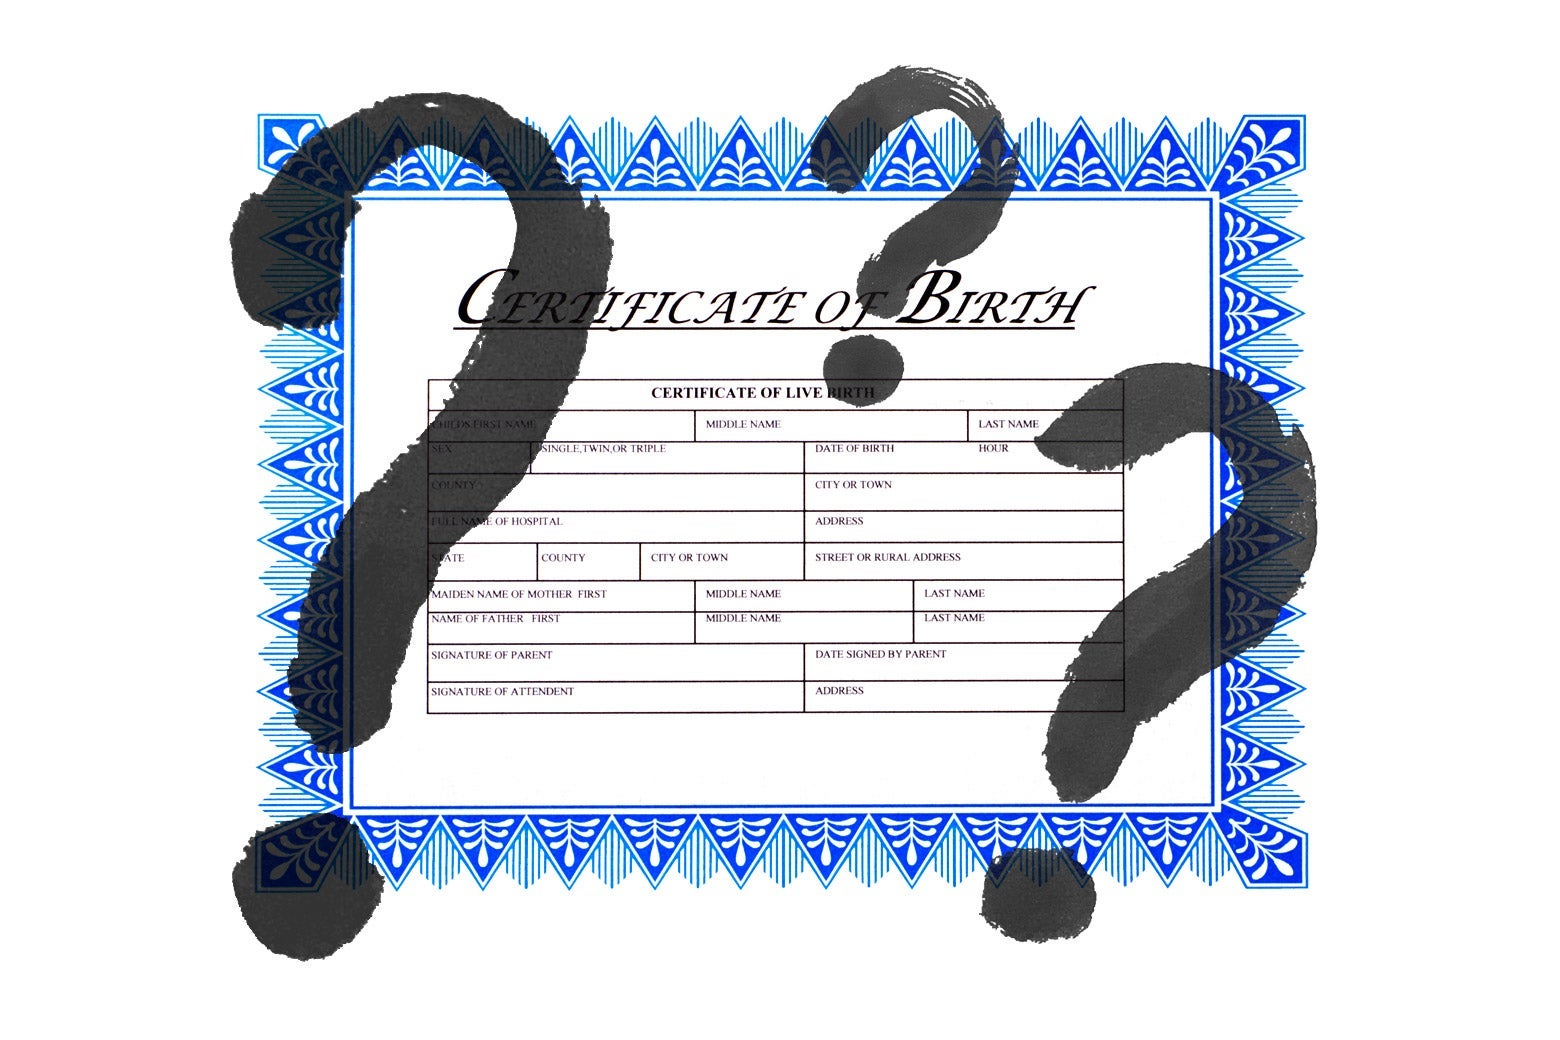 Photo illustration of a birth certificate with question marks superimposed.